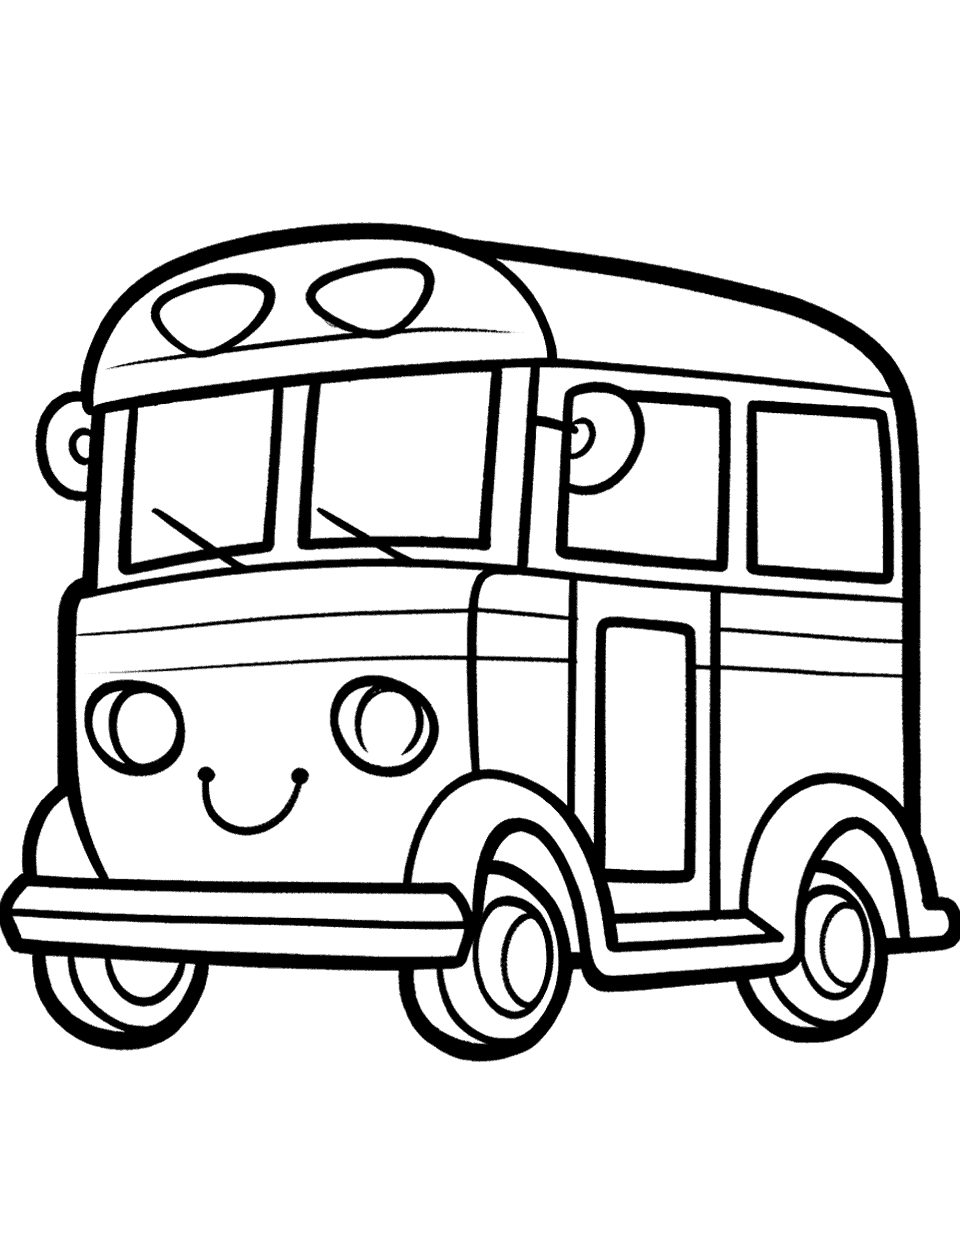 School Days Coloring Page - A simple picture of a school bus.